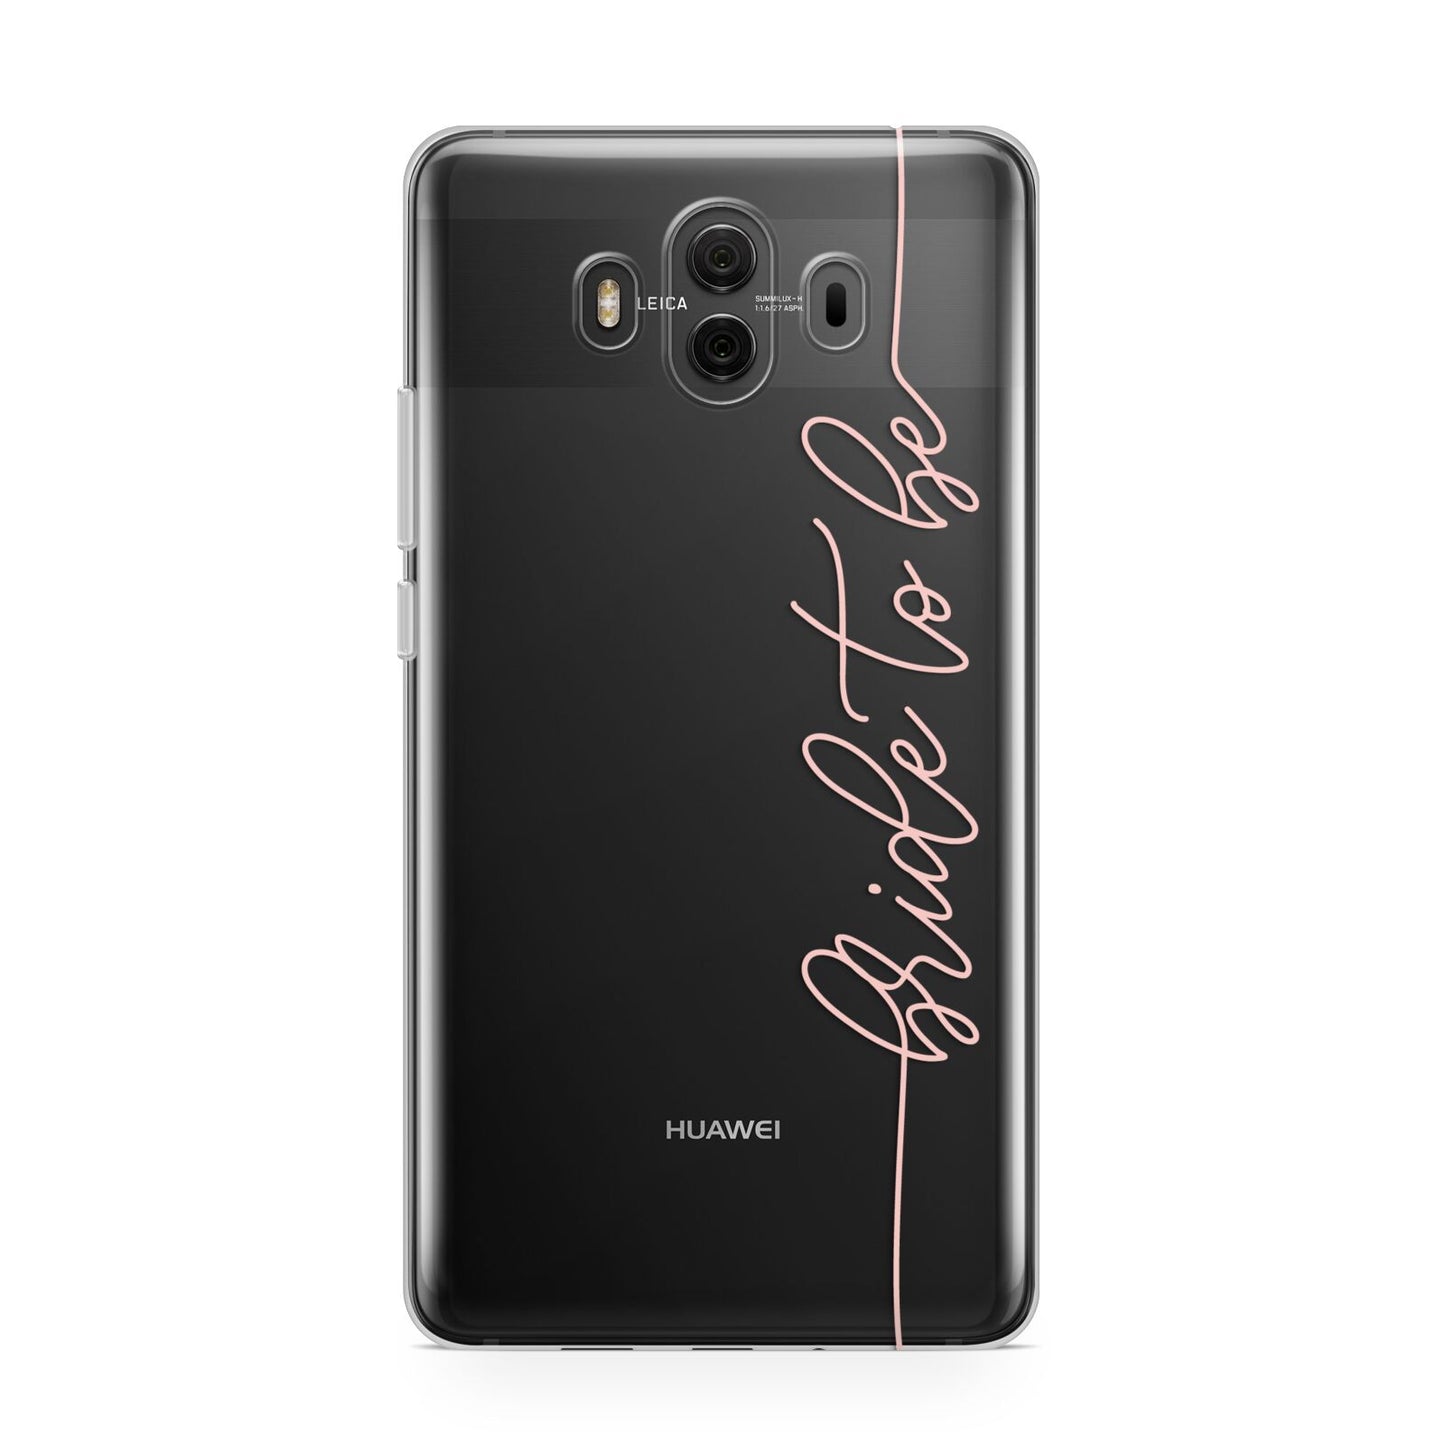 Bride To Be Huawei Mate 10 Protective Phone Case